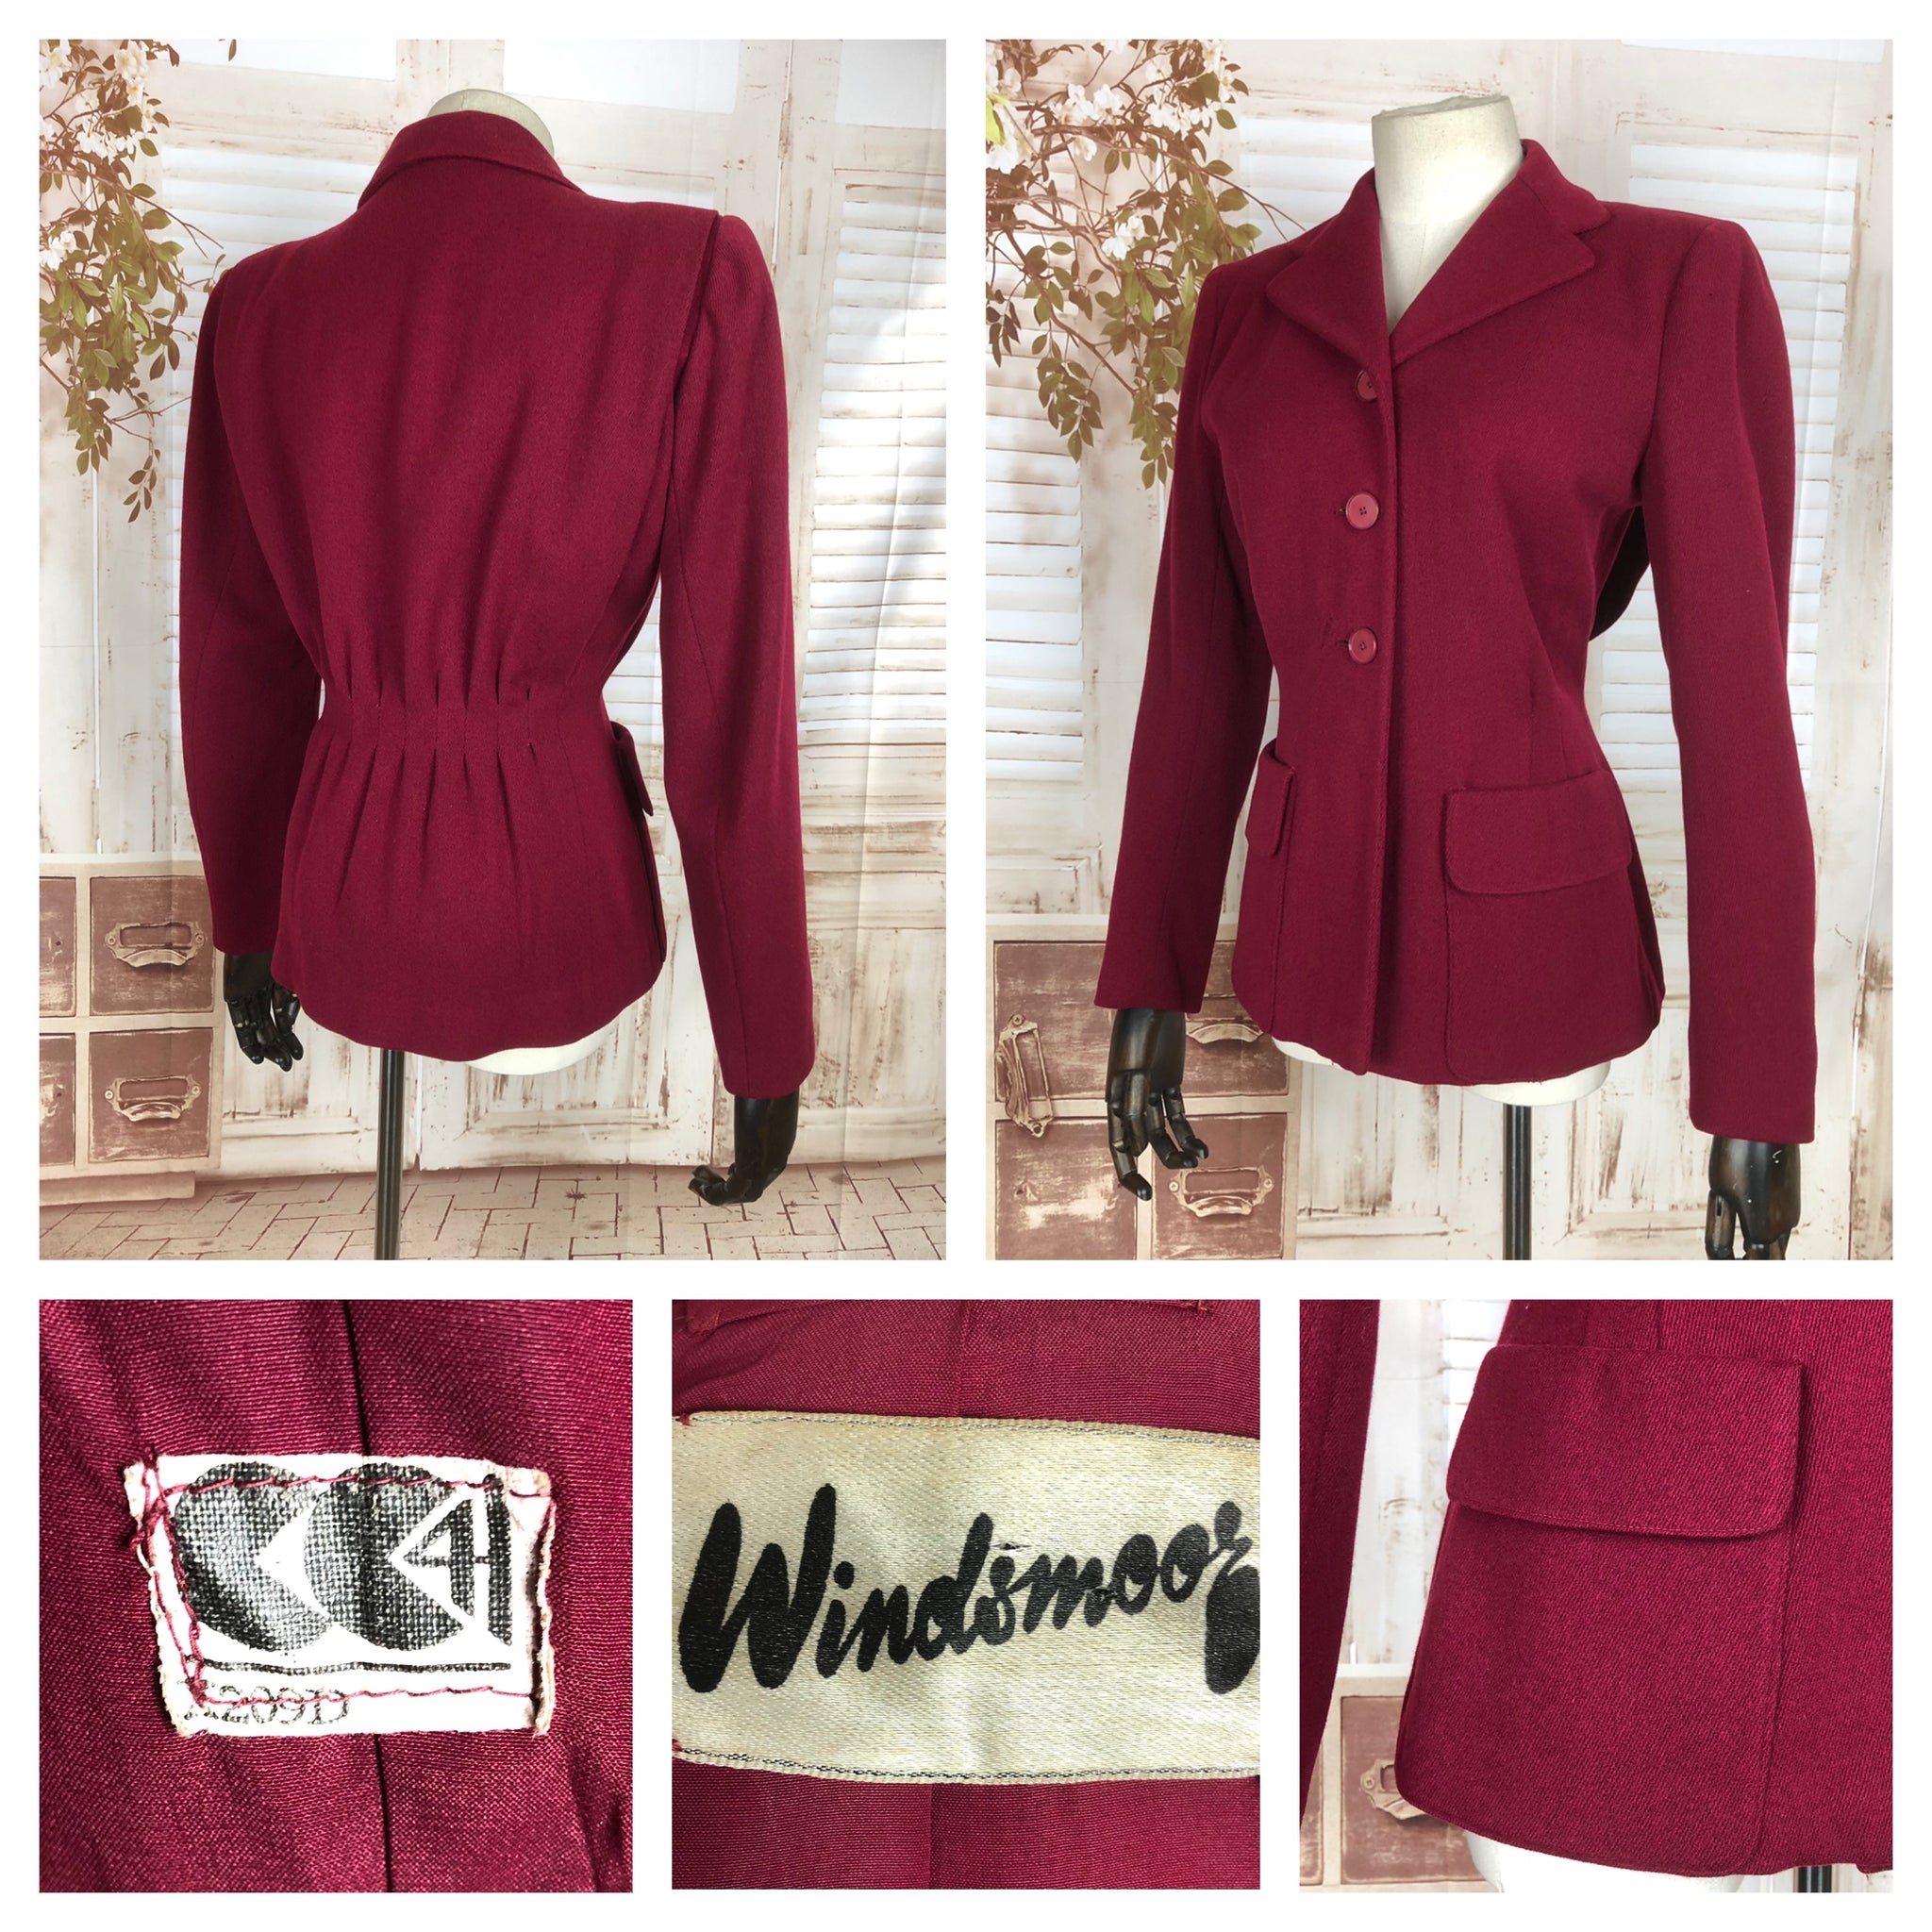 Original Vintage 1940s 40s Cranberry Wool Jacket With CC41 Utility Label By Windsmoor